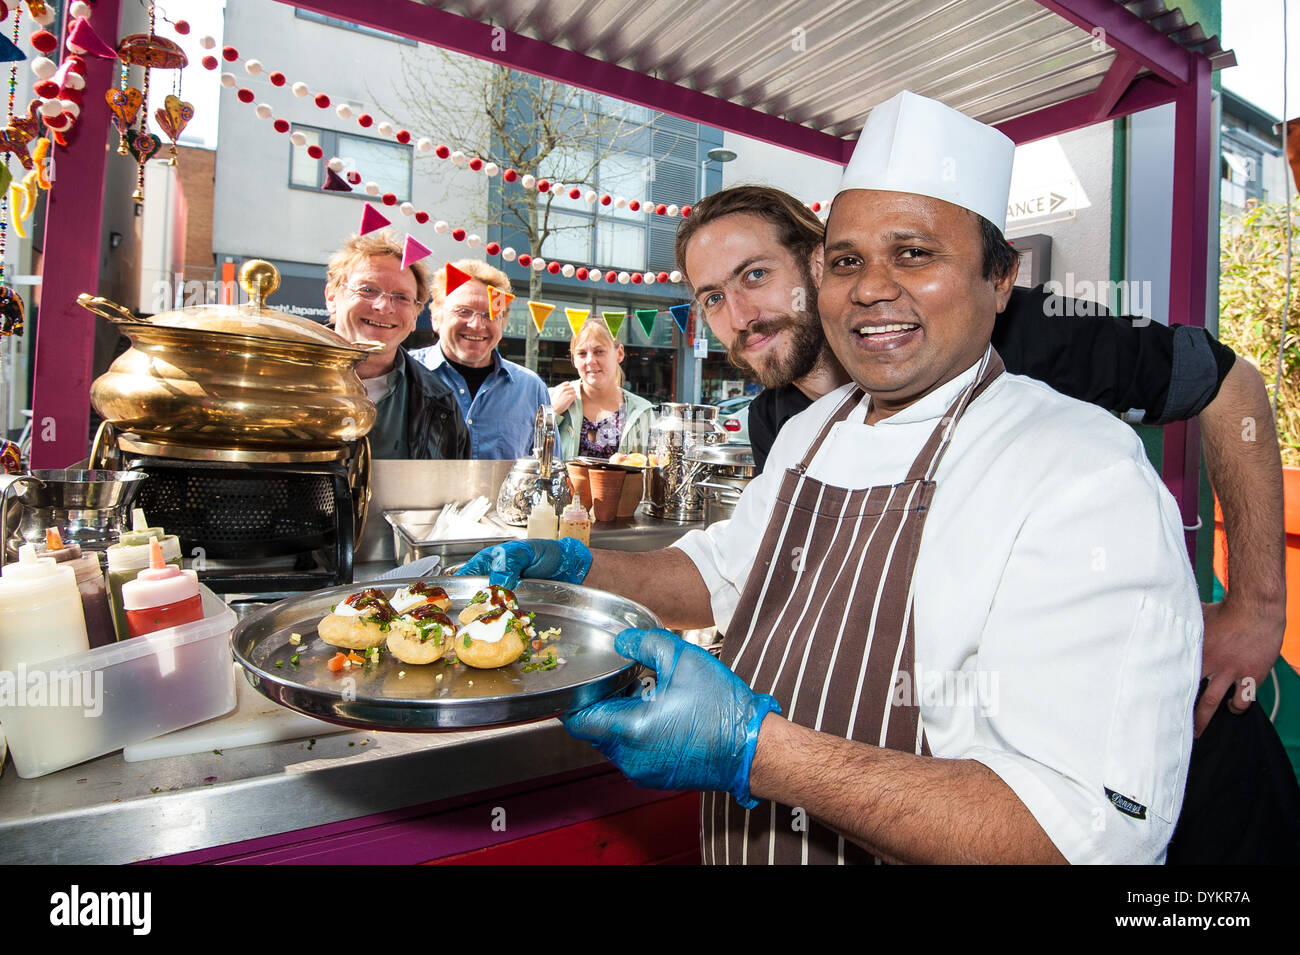 Brighton, UK. 21st April, 2014. At the Chilli Pickle in Jubilee Square Kumar serves up pani puri to visitors on the Brighton & Hove Food and Drink Festival Food Trail in Brighton who sample the delights of 10 local restaurants and bars whilst following the trail around The Lanes and North Laine of Brighton. Taking part were Aguadulce, Be At One, Boho Gelato, La Cave a Fromage, The Chilli Pickle, La Choza, Moshimo, Julien Plumart, The Manor, Yum Yum Ninja. photo Credit: Julia Claxton/Alamy Live News Stock Photo